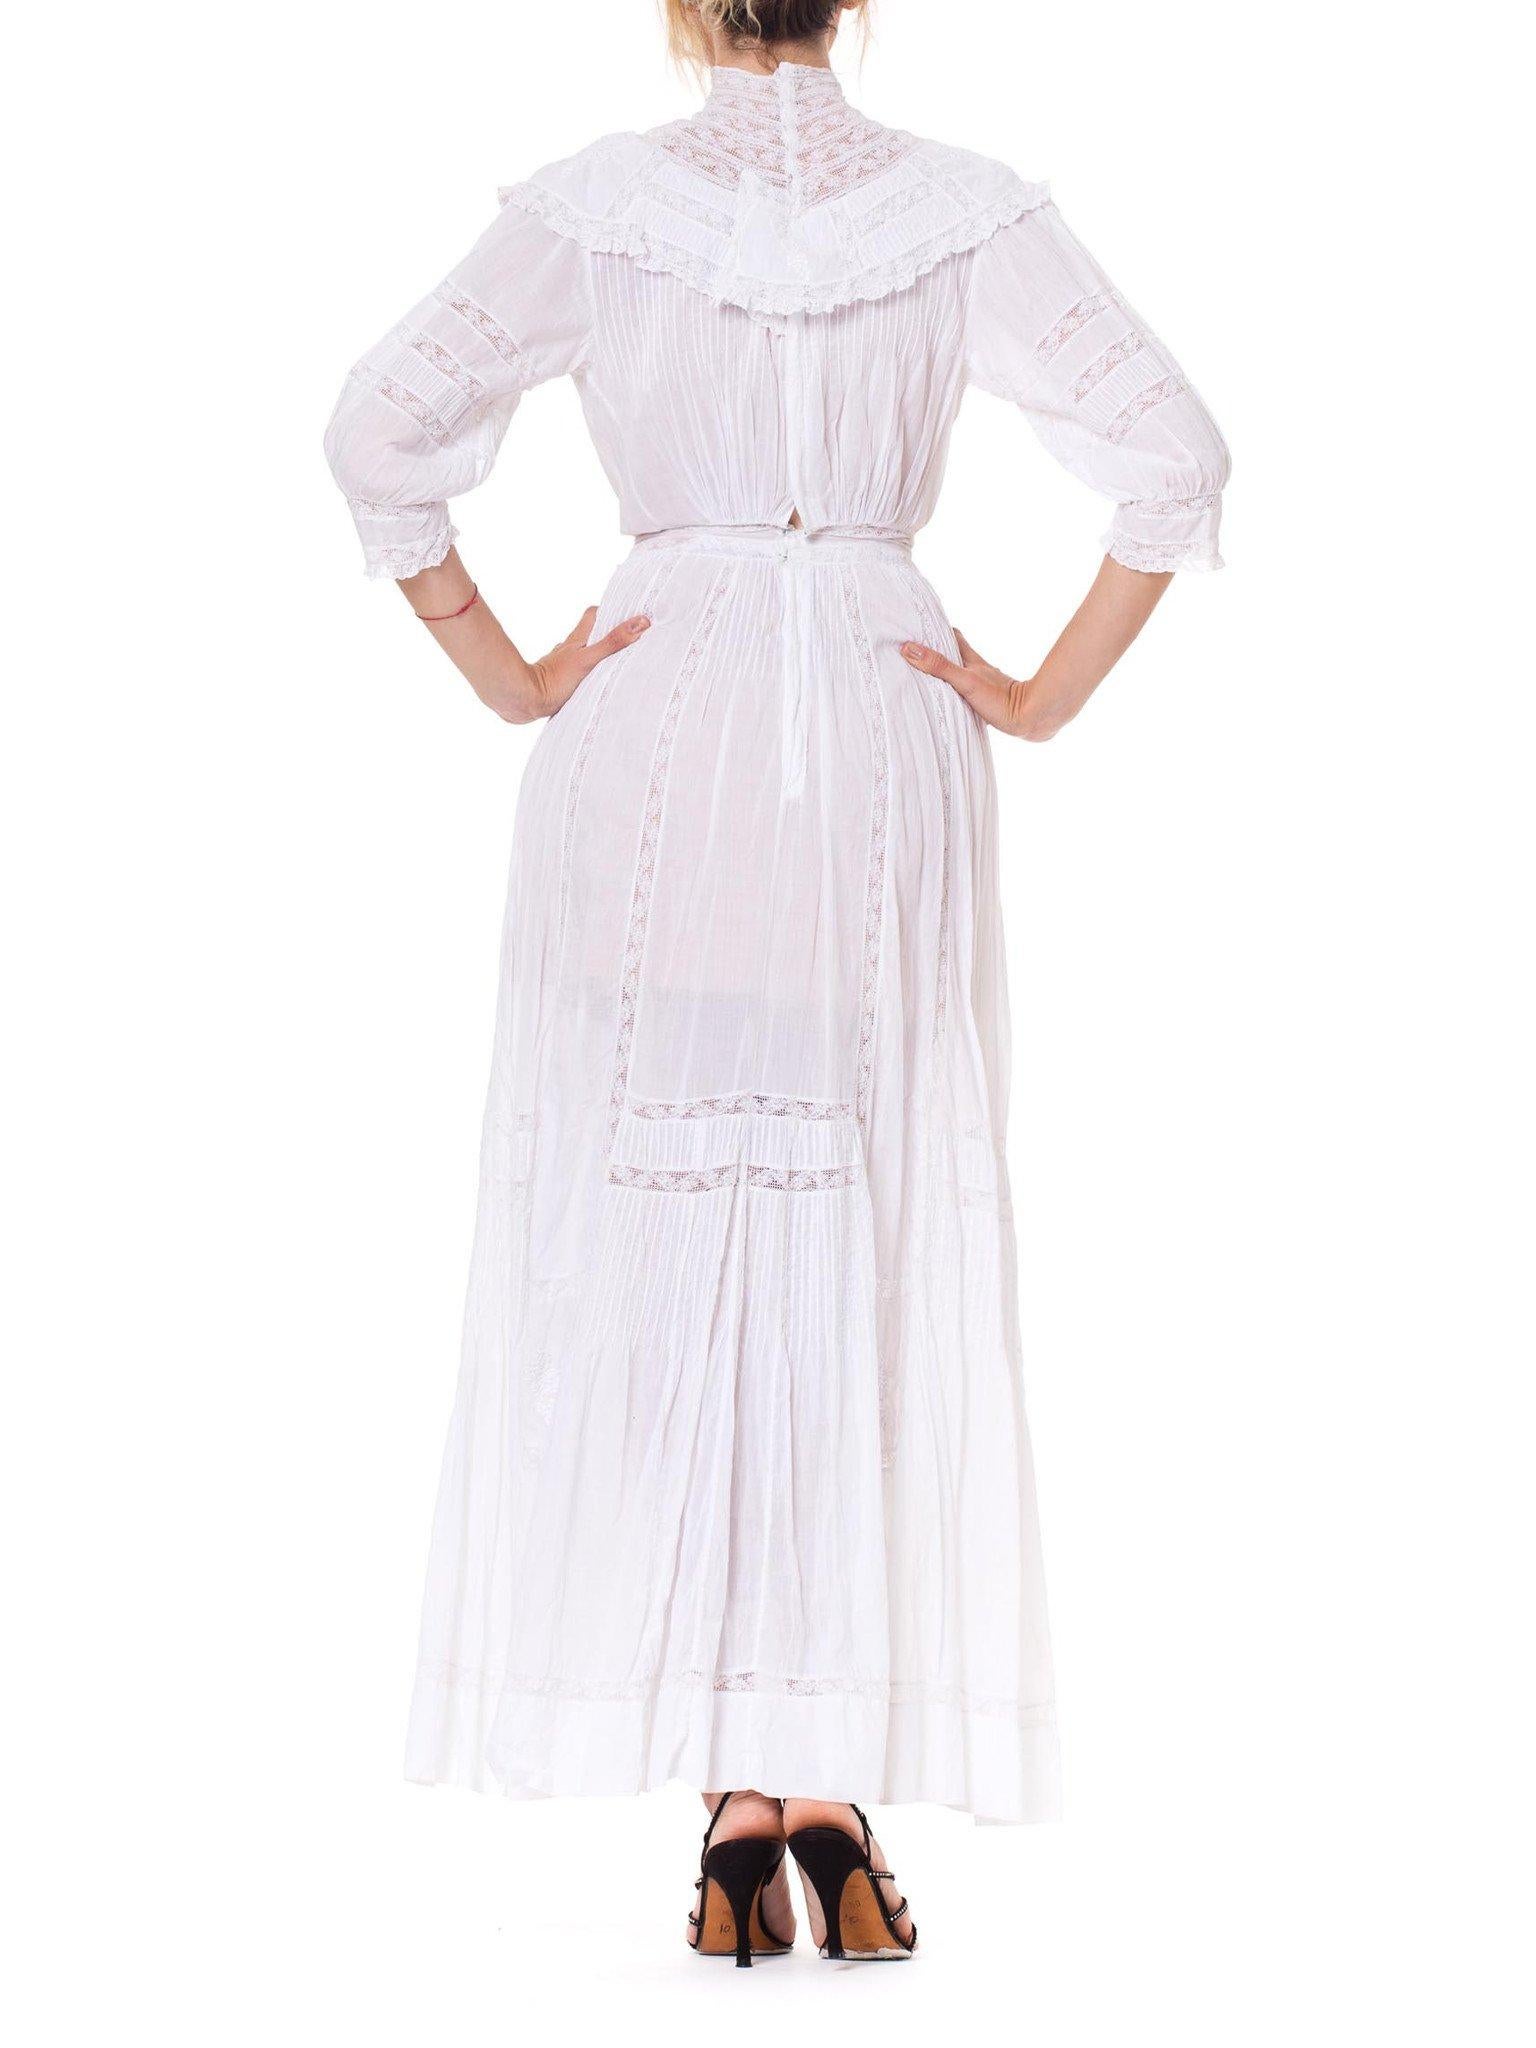 Gray Victorian White Cotton Voile Lace Tea Dress With Half Sleeves